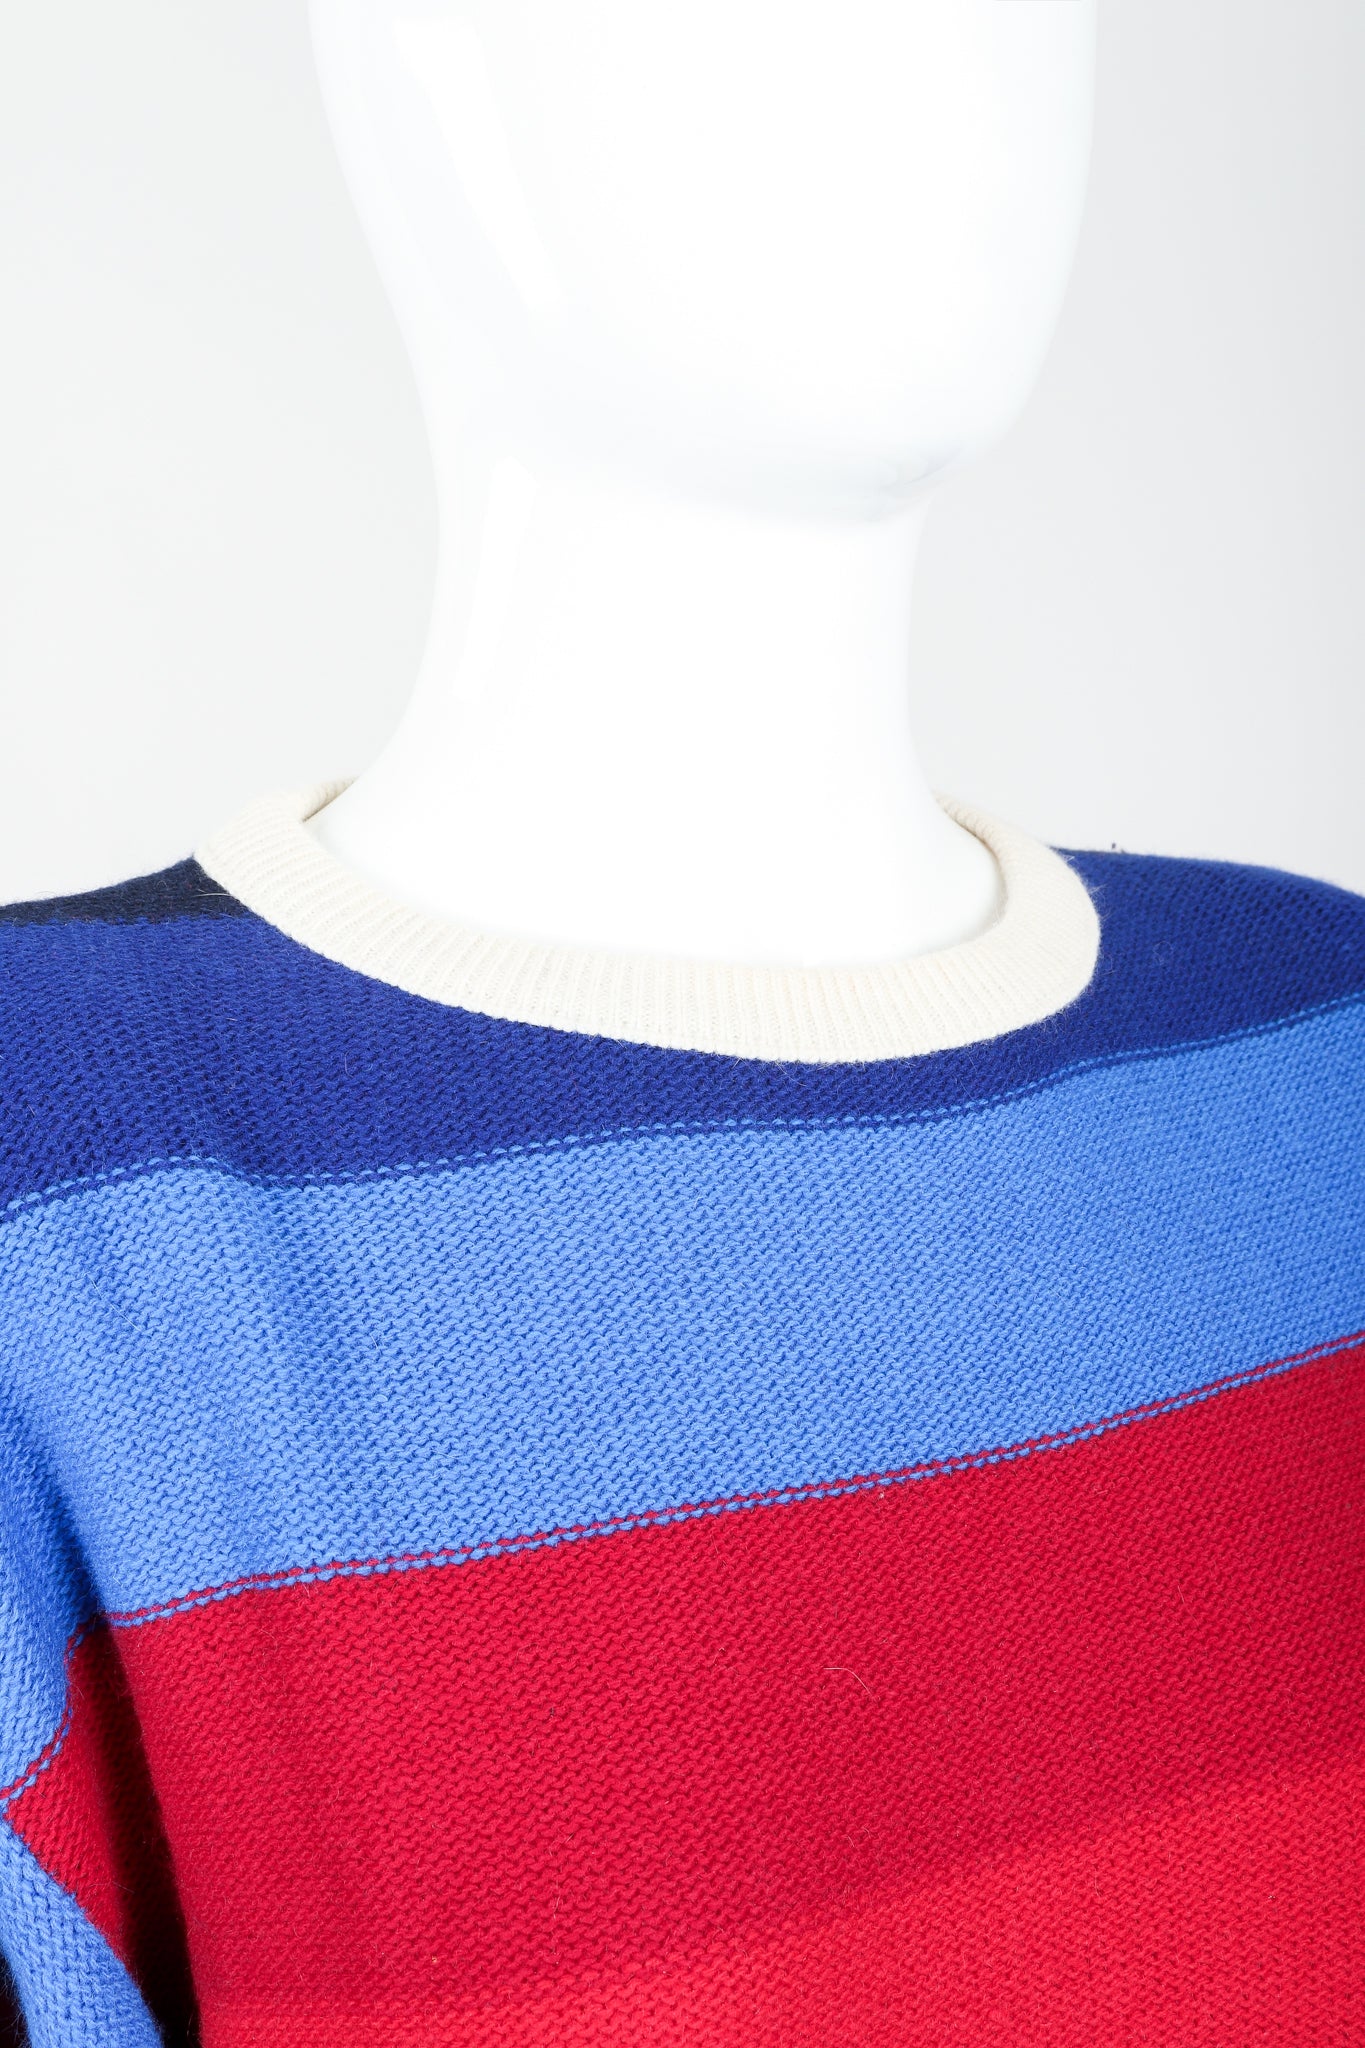 Vintage Sonia Rykiel Ombré Striped Knit Sweater on Mannequin neckline at Recess